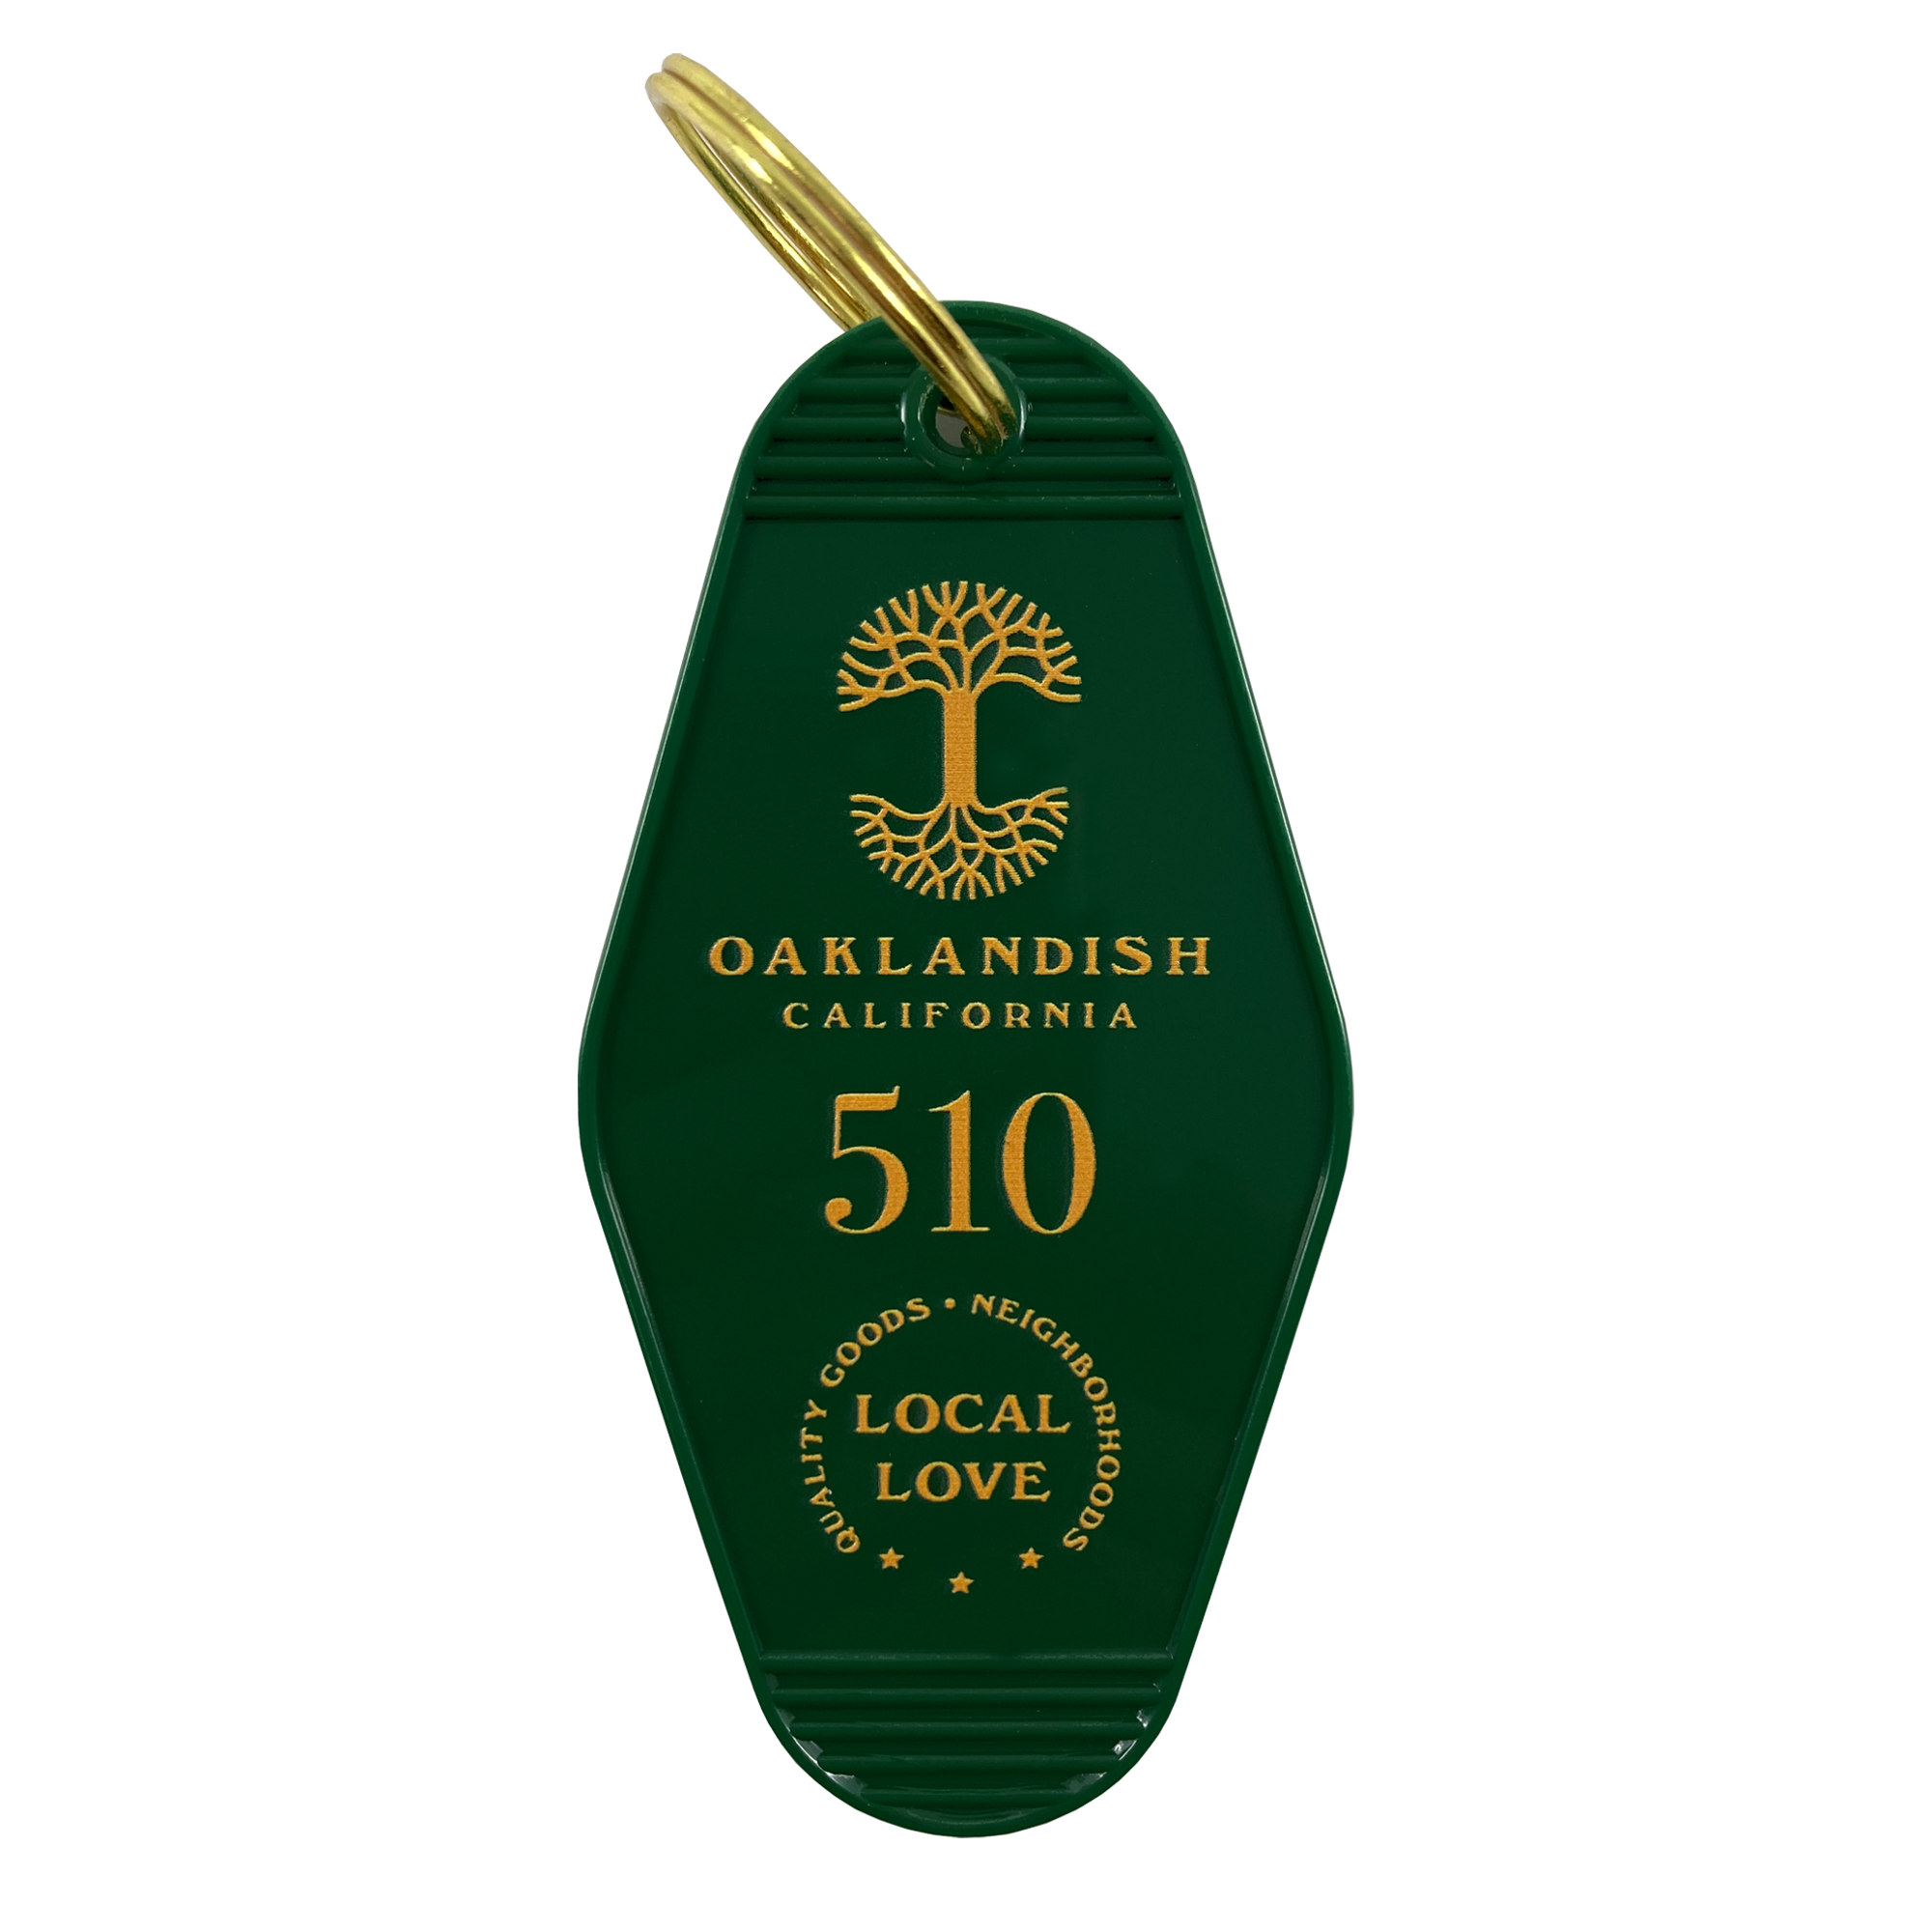 Green motel-style keychain with gold Oaklandish Logo and wordmark and 510 local love logo.